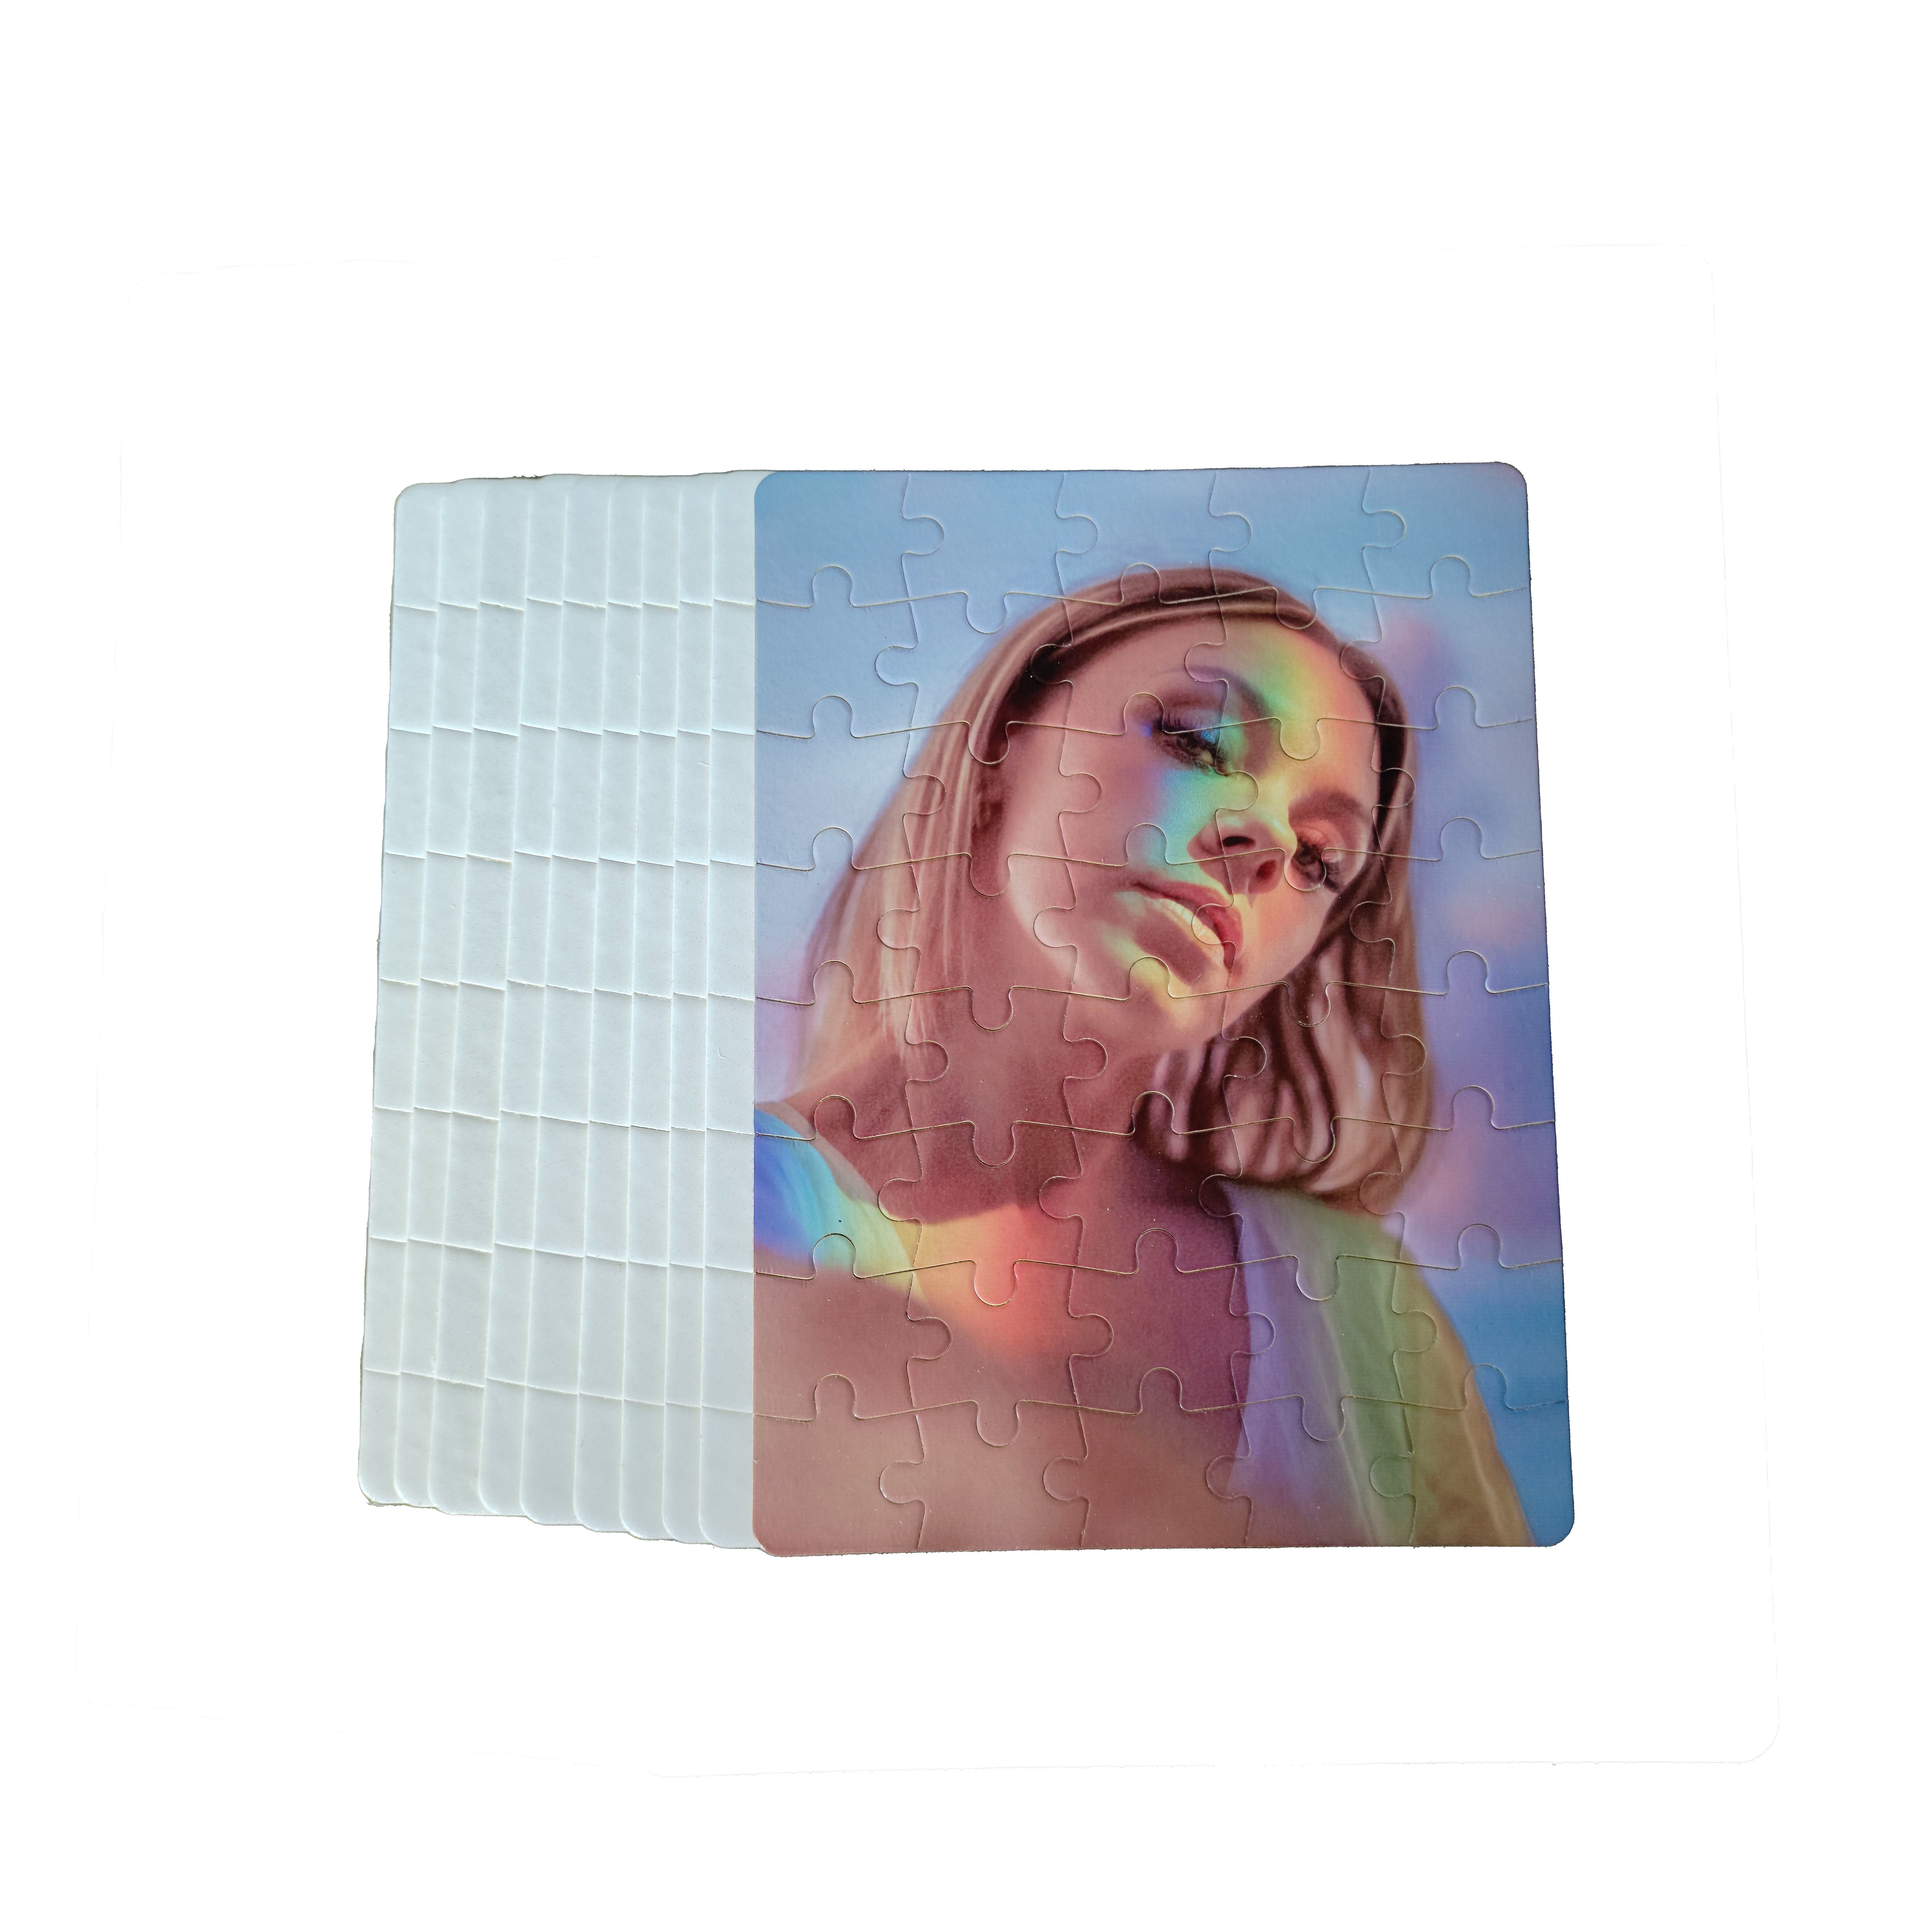 Create Unique DIY Crafts with 10 Sets of Sublimation Puzzle Blanks - 120 &  80 Slices for Heat Press Transfer!